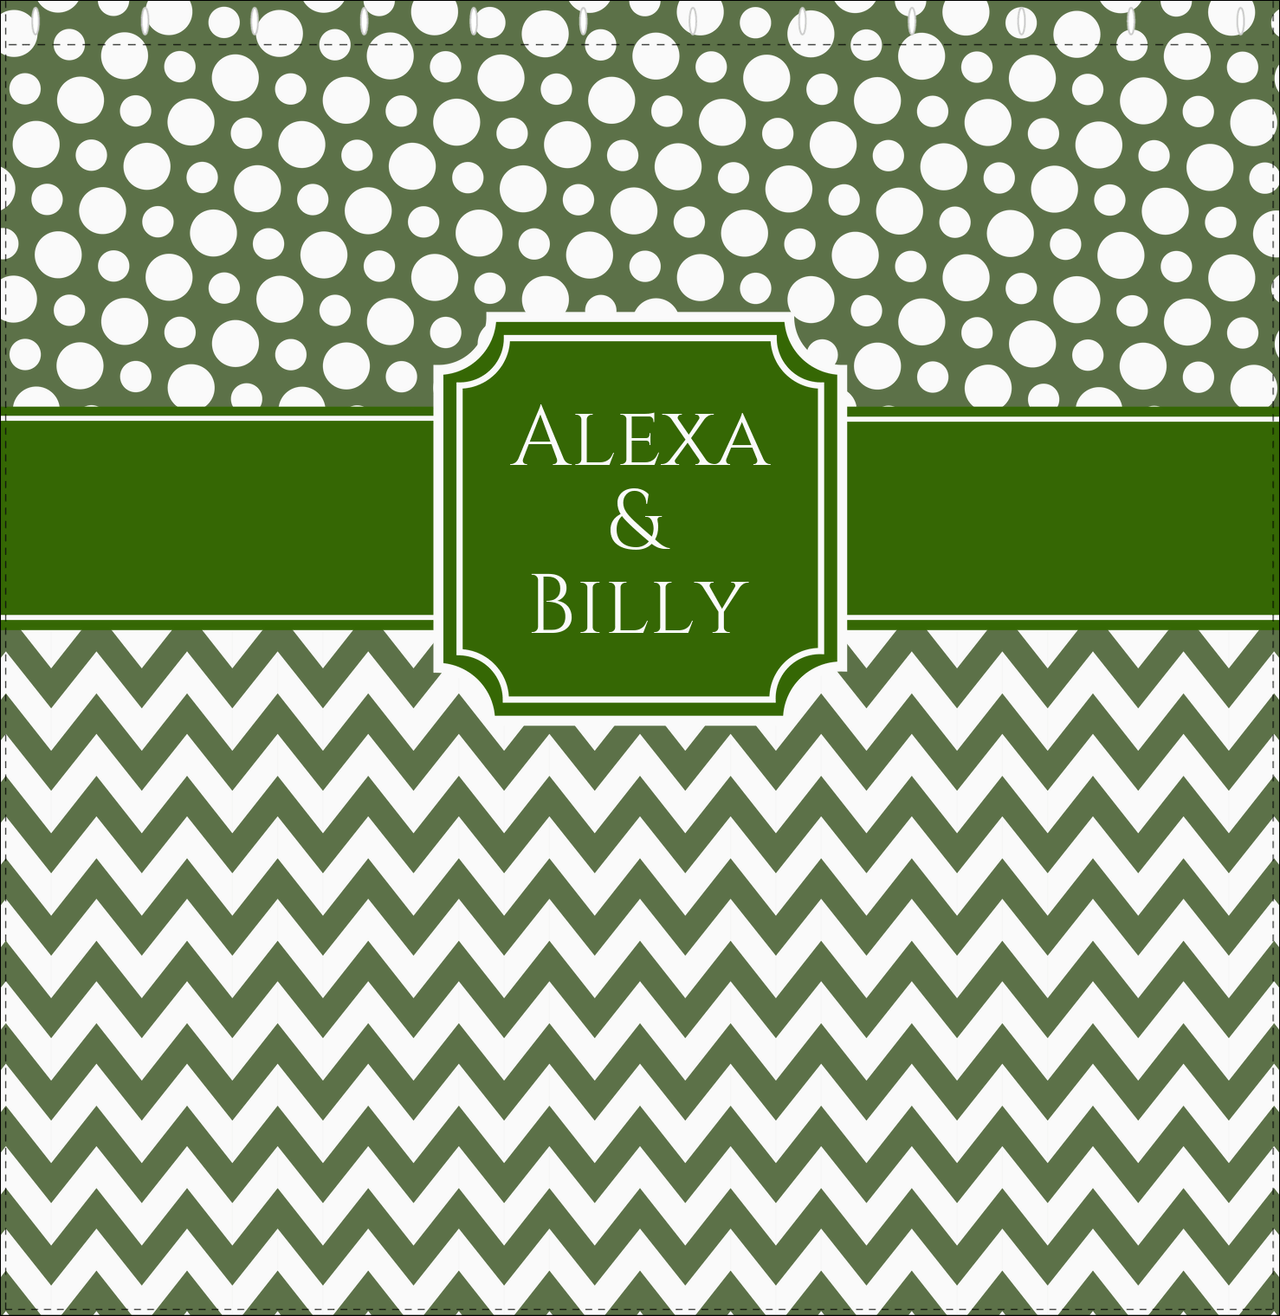 Personalized Polka Dots and Chevron III Shower Curtain - Green and White - Stamp Nameplate - Decorate View